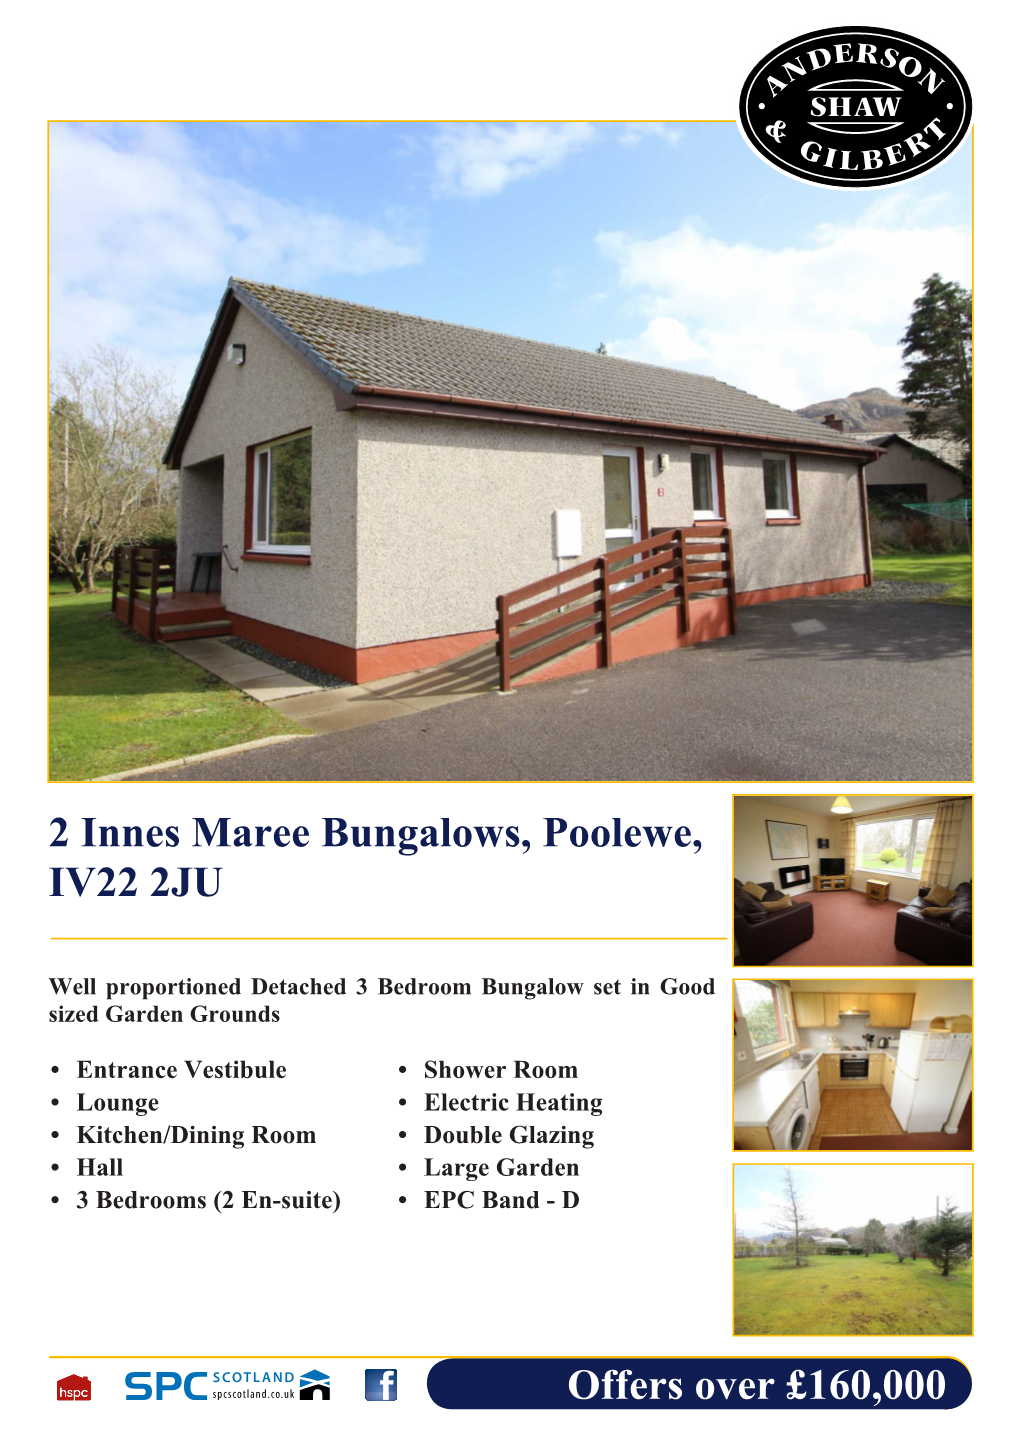 Offers Over £160,000 2 Innes Maree Bungalows, Poolewe, IV22